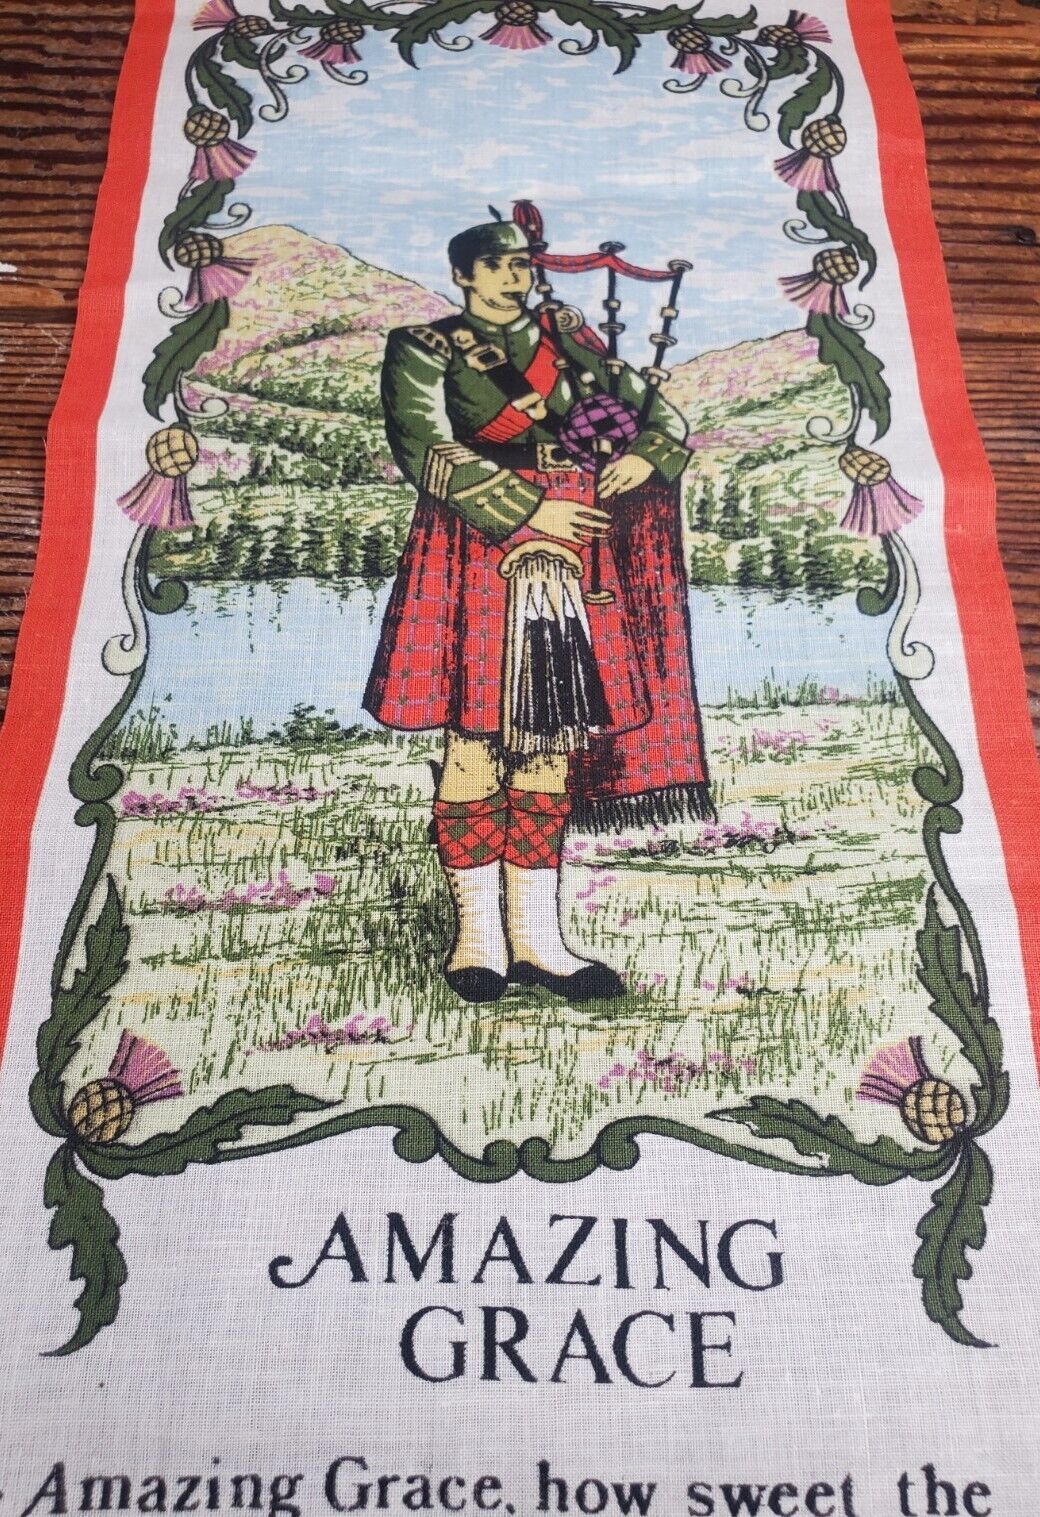 Vintage Amazing Grace Lyrics Wall Hanging Song Bagpipes Tapestry Britian Printed